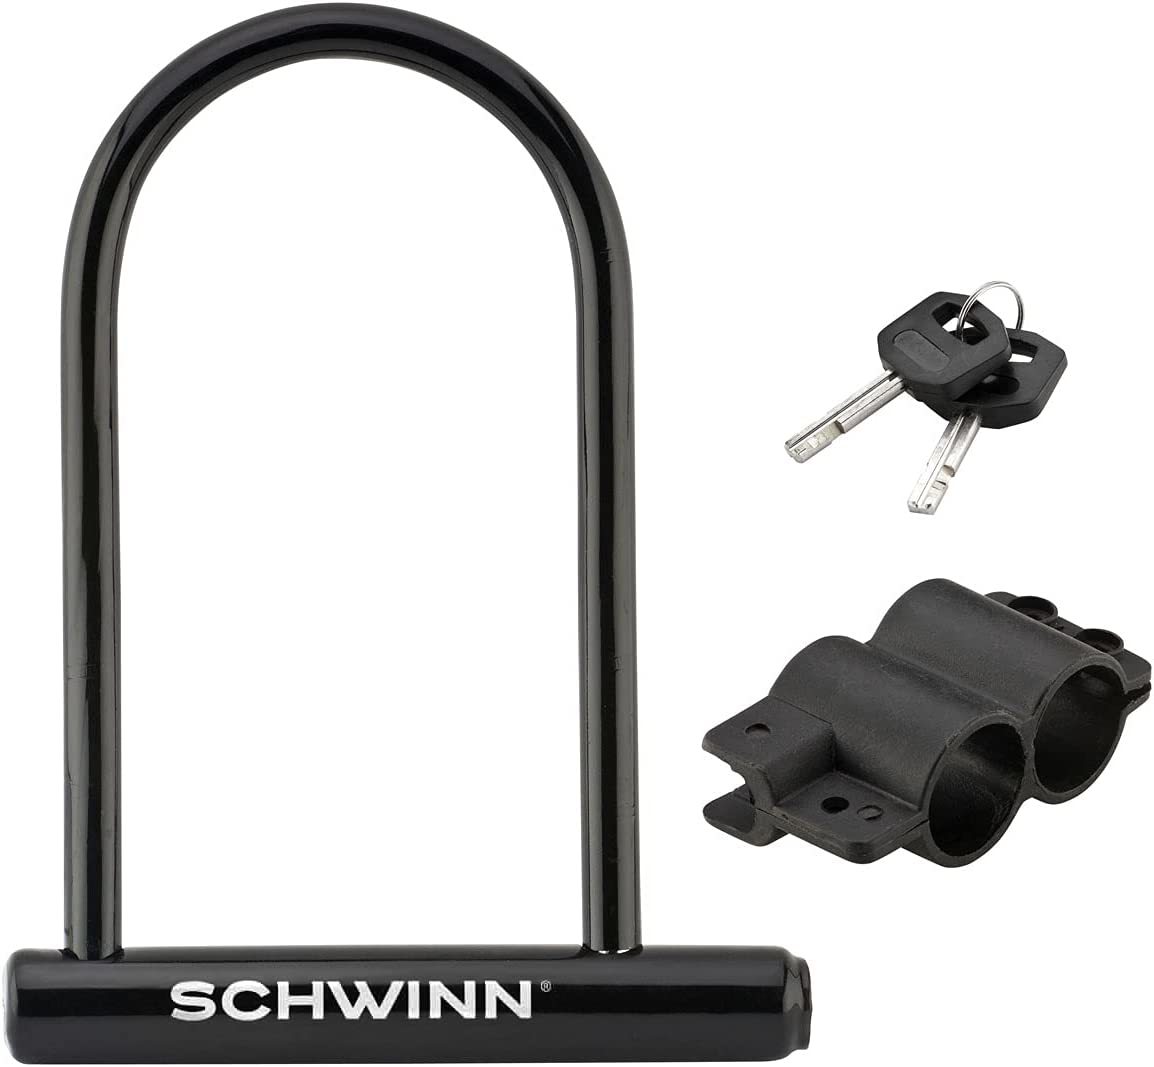 DocksLocks 5' Straight Cable with Key Lock